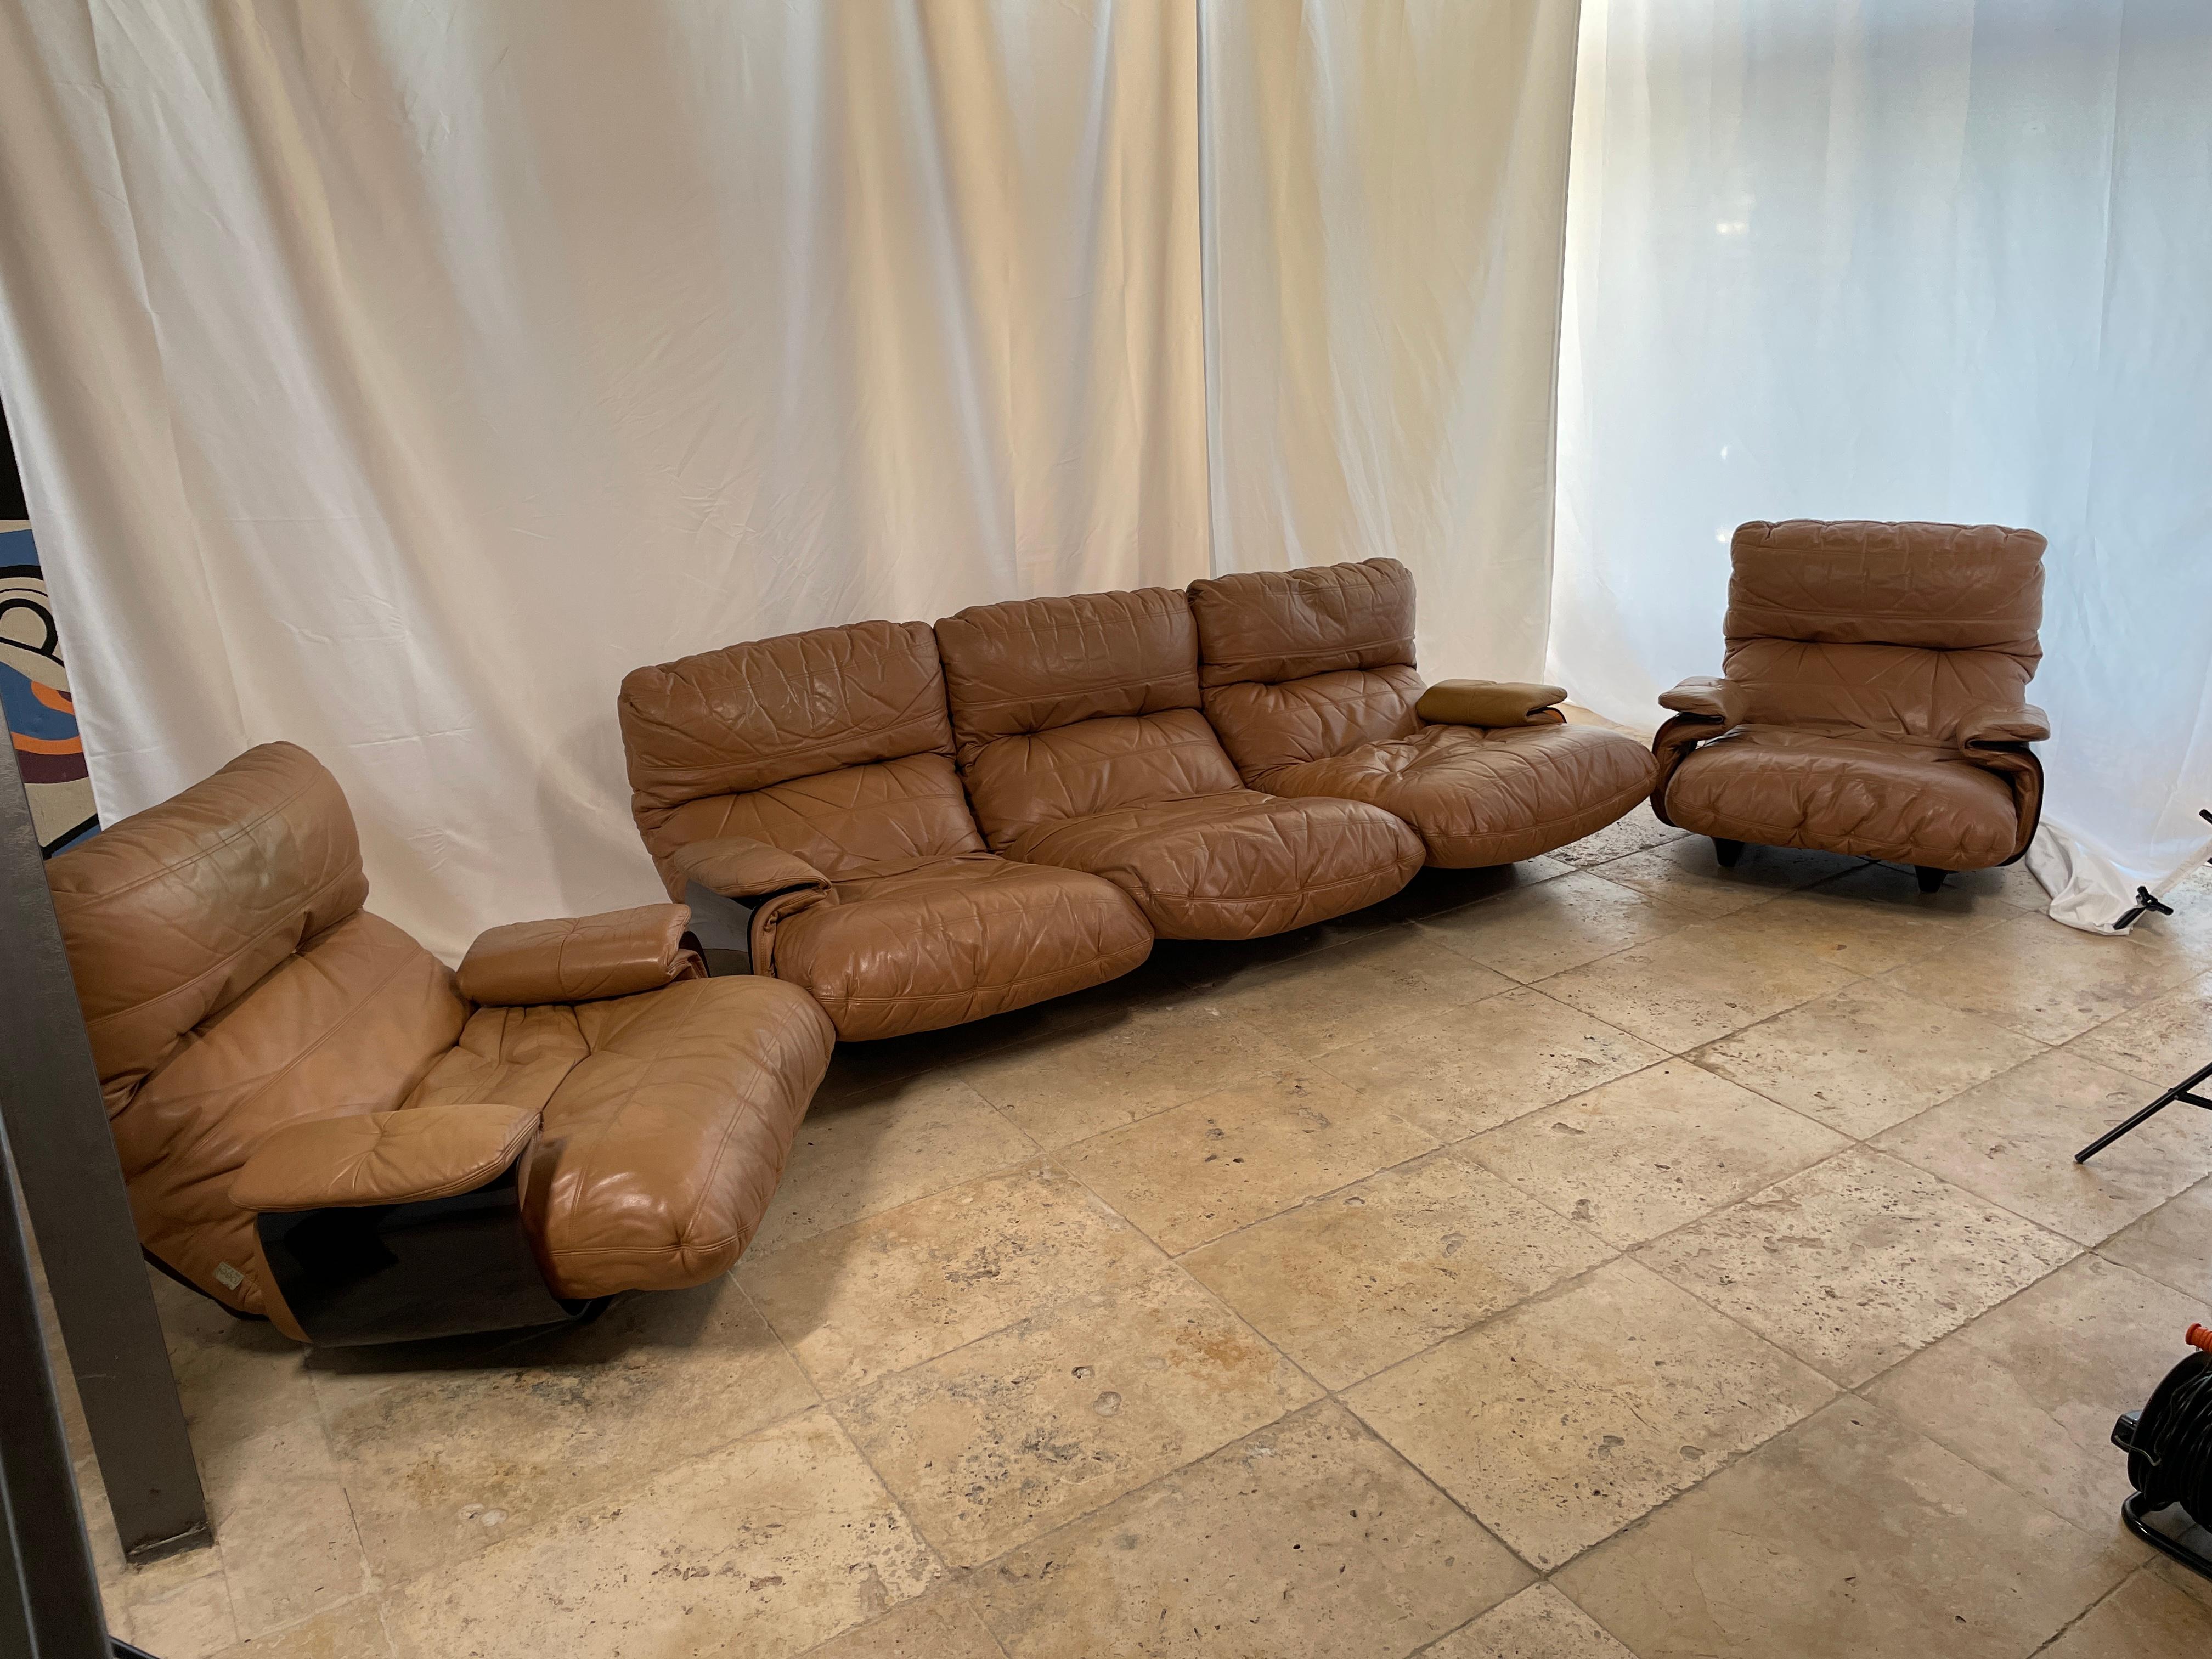 The Marsala modular sofa was designed in 1971 by Michel Ducaroy, as the new head of the Ligne Roset brand. Considered as the precursor of the TOGO because of its shape and its seating close to the ground. 

The Marsala is extremely comfortable and